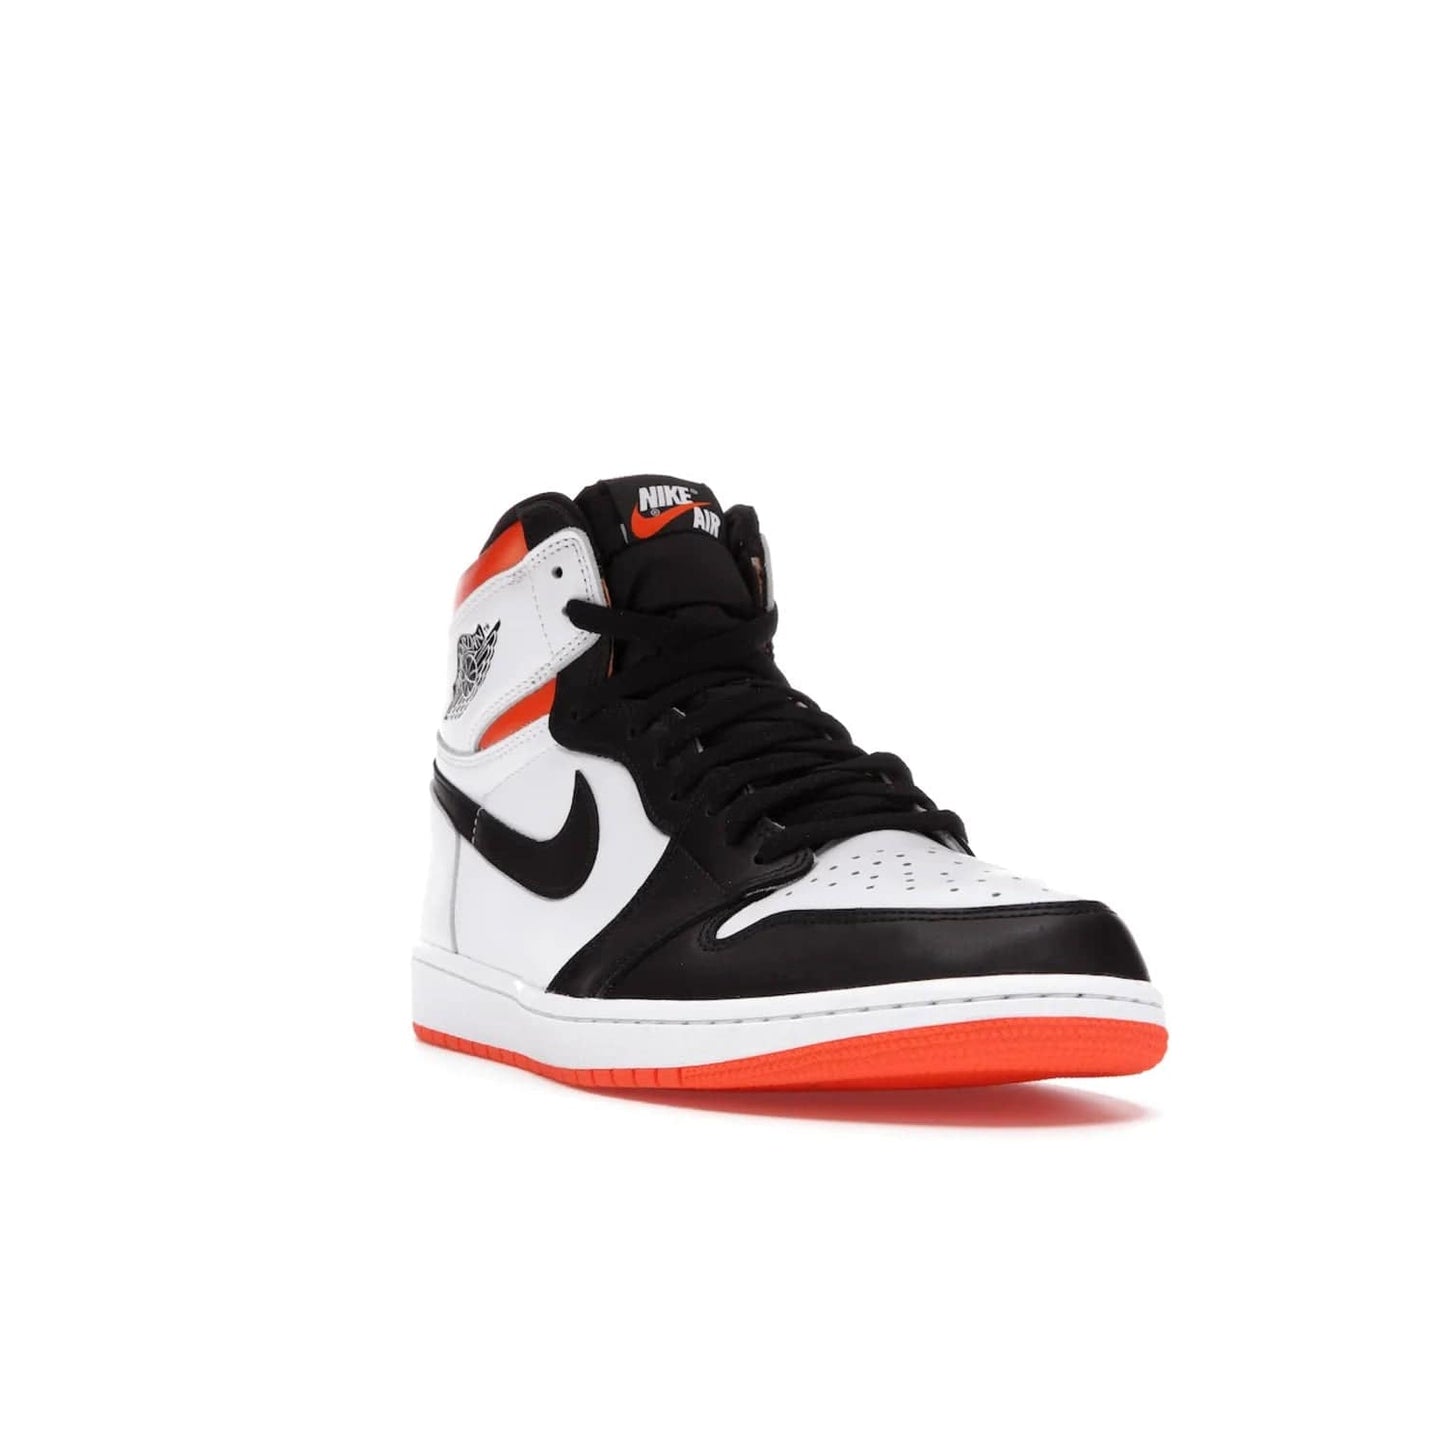 Jordan 1 Retro High Electro Orange - Image 7 - Only at www.BallersClubKickz.com - This Air Jordan 1 Retro High Electro Orange features a white leather upper with black overlays and vibrant Hyper Orange ankle wrap. Turn heads with this iconic design of woven tongue label and sole. Get yours today and add some serious style to your rotation.